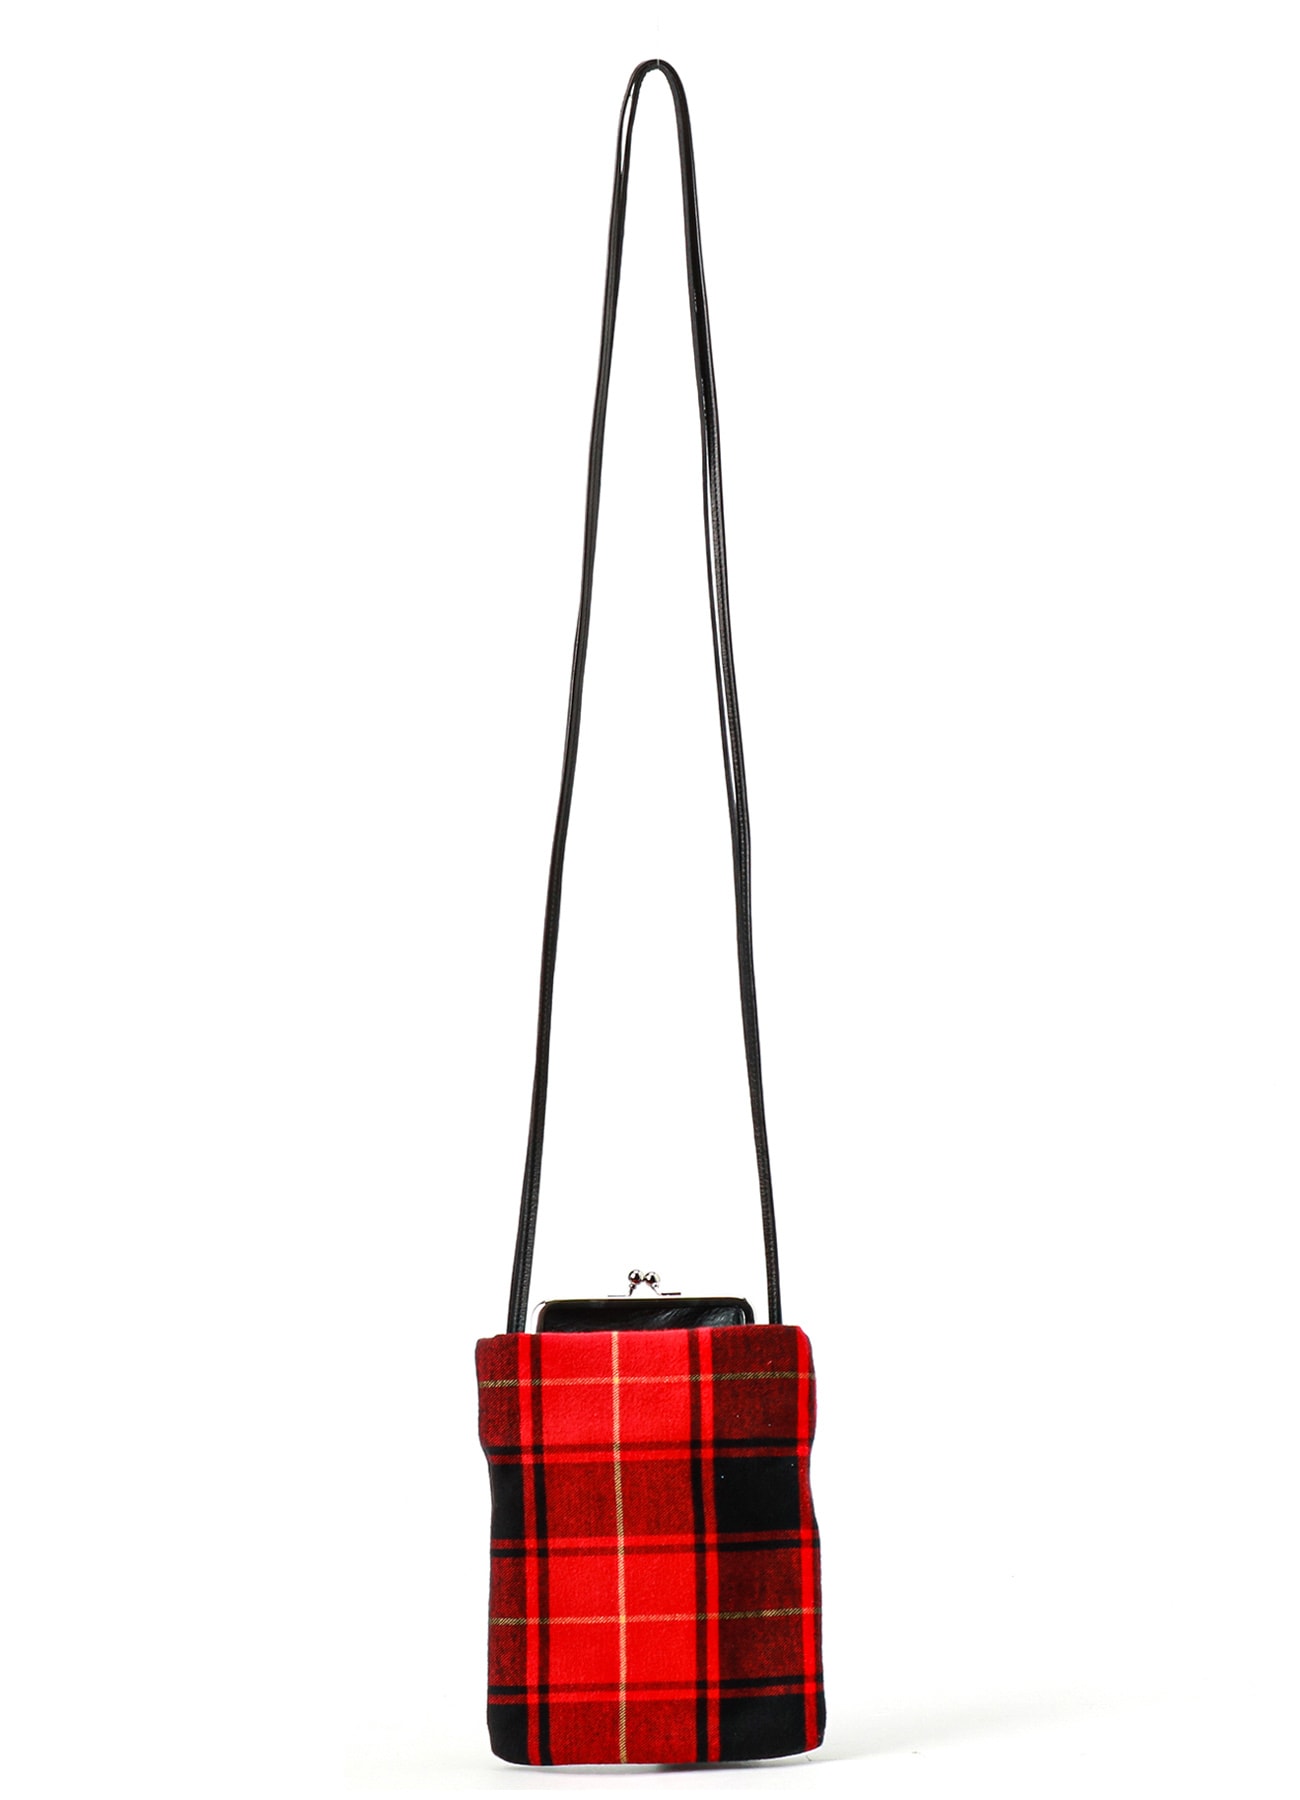 【7/17 12:00(JST) Release】COW LEATHER × TARTAN CHECK CLASP POCHETTE